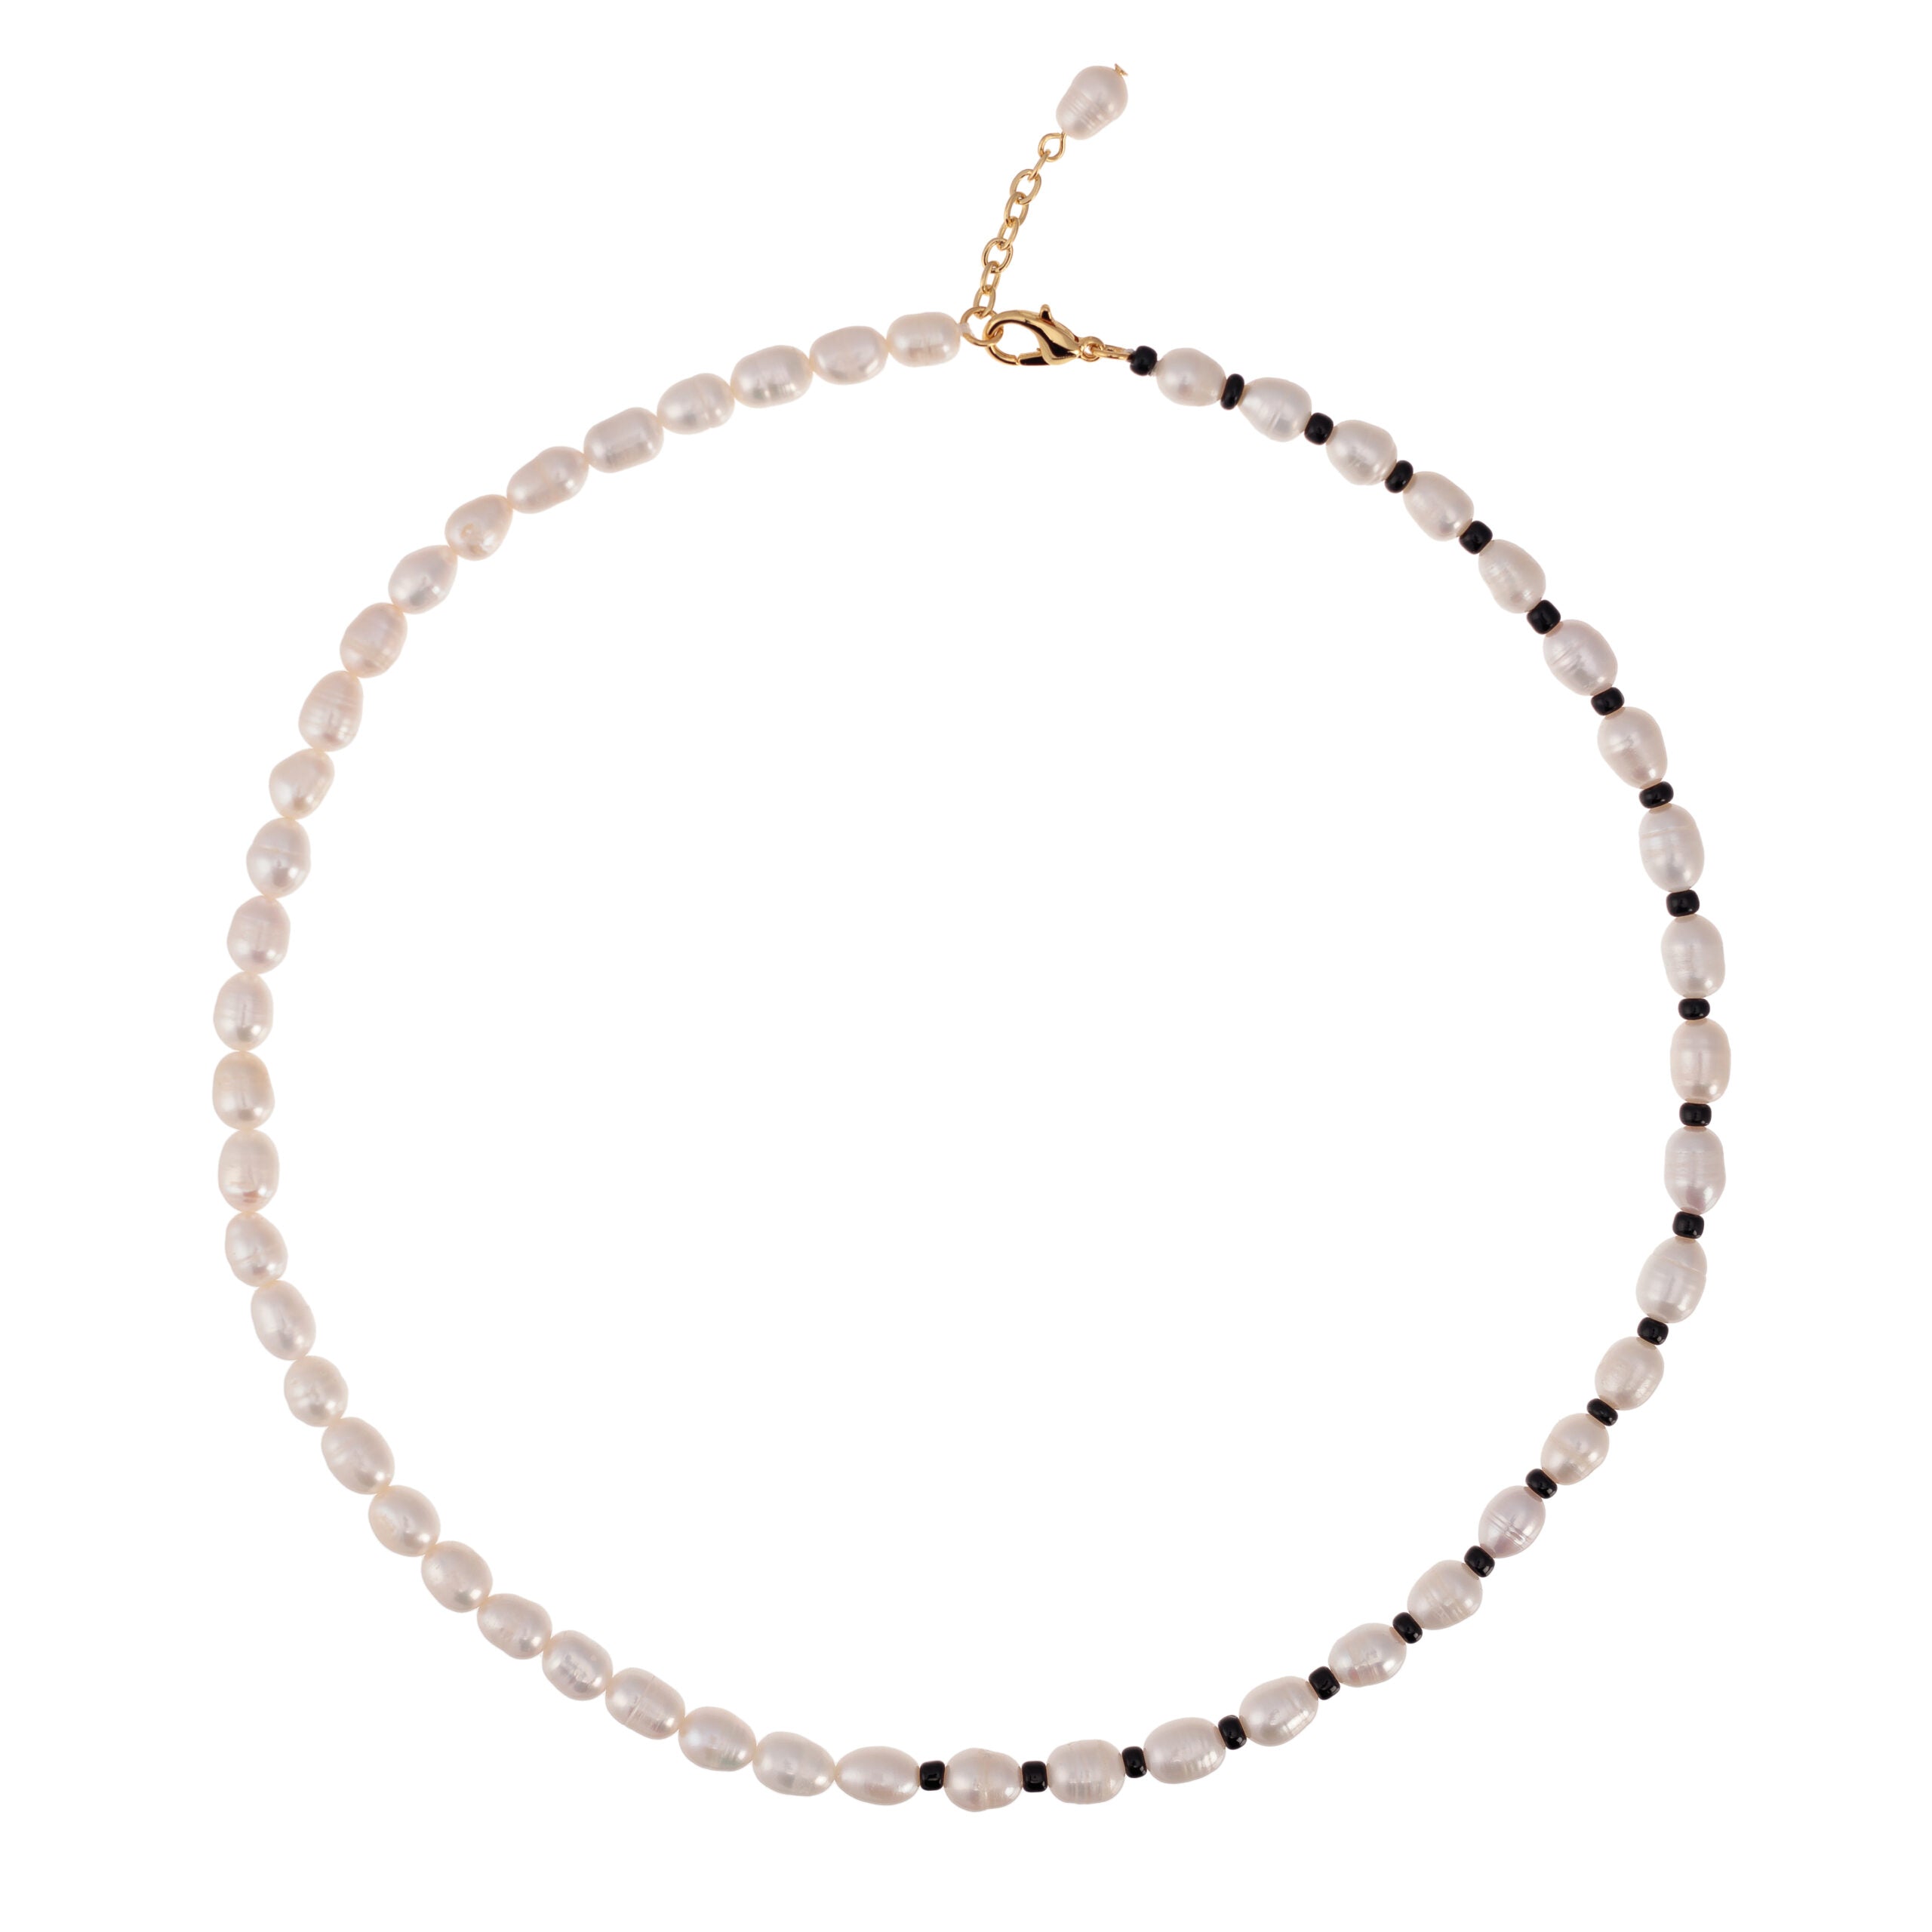 Talis Chains Monochrome Pearl Necklace